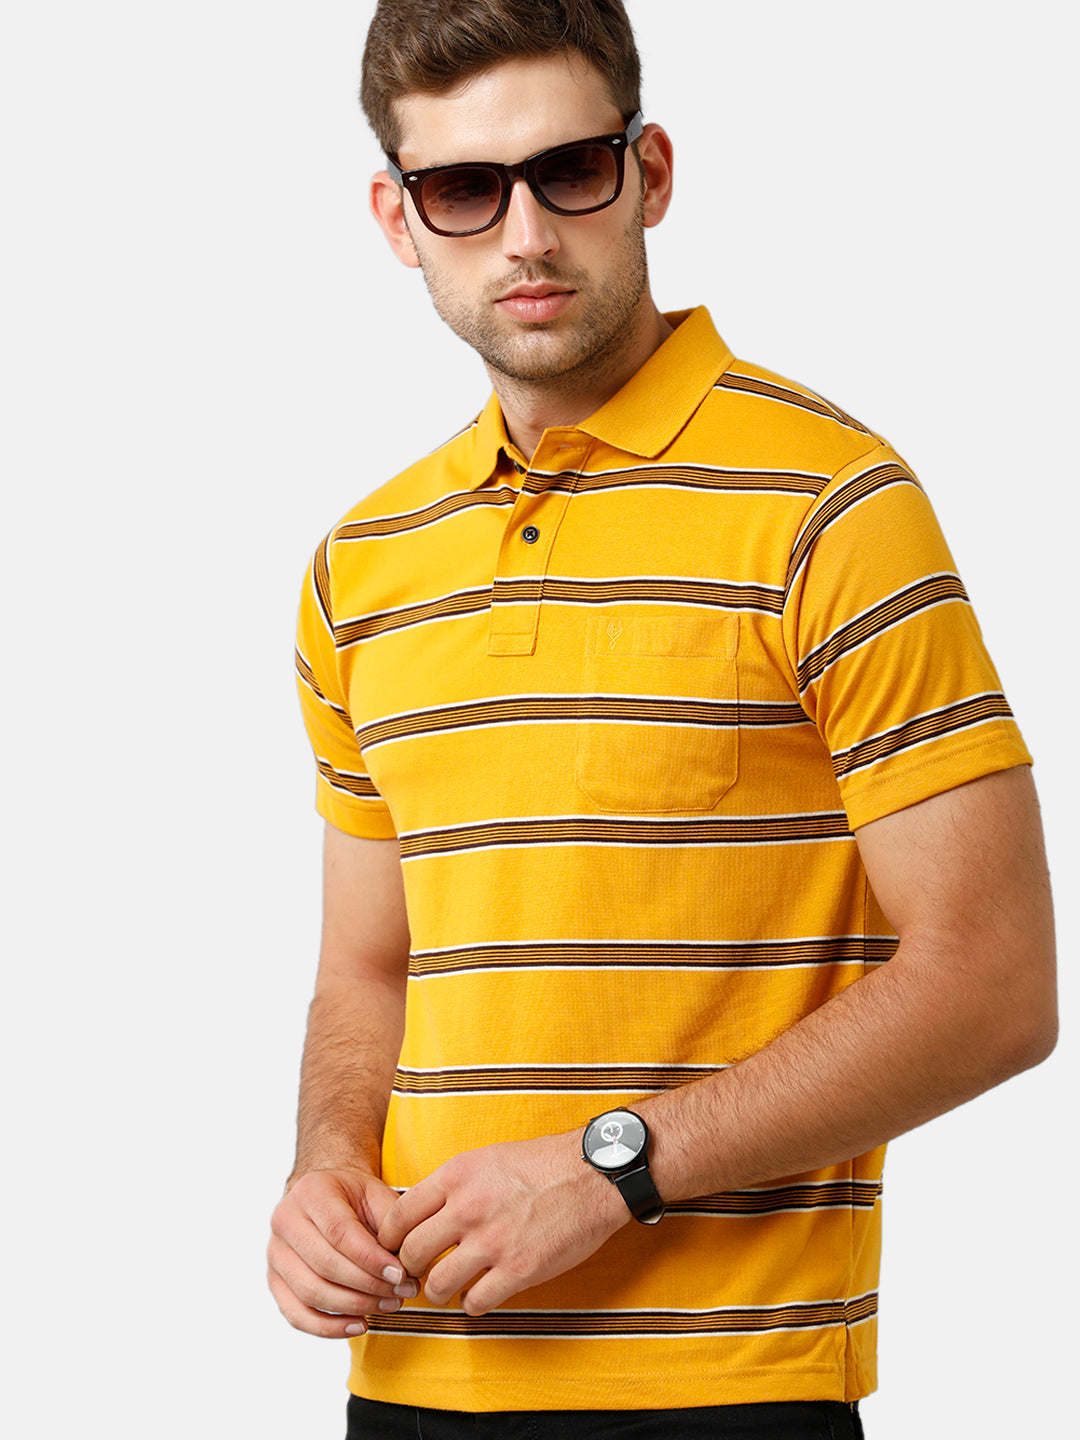 Classic Polo Mens Cotton Blend Half Sleeve Striped Authentic Fit Polo Neck Yellow Color T-Shirt | Avon 481 B